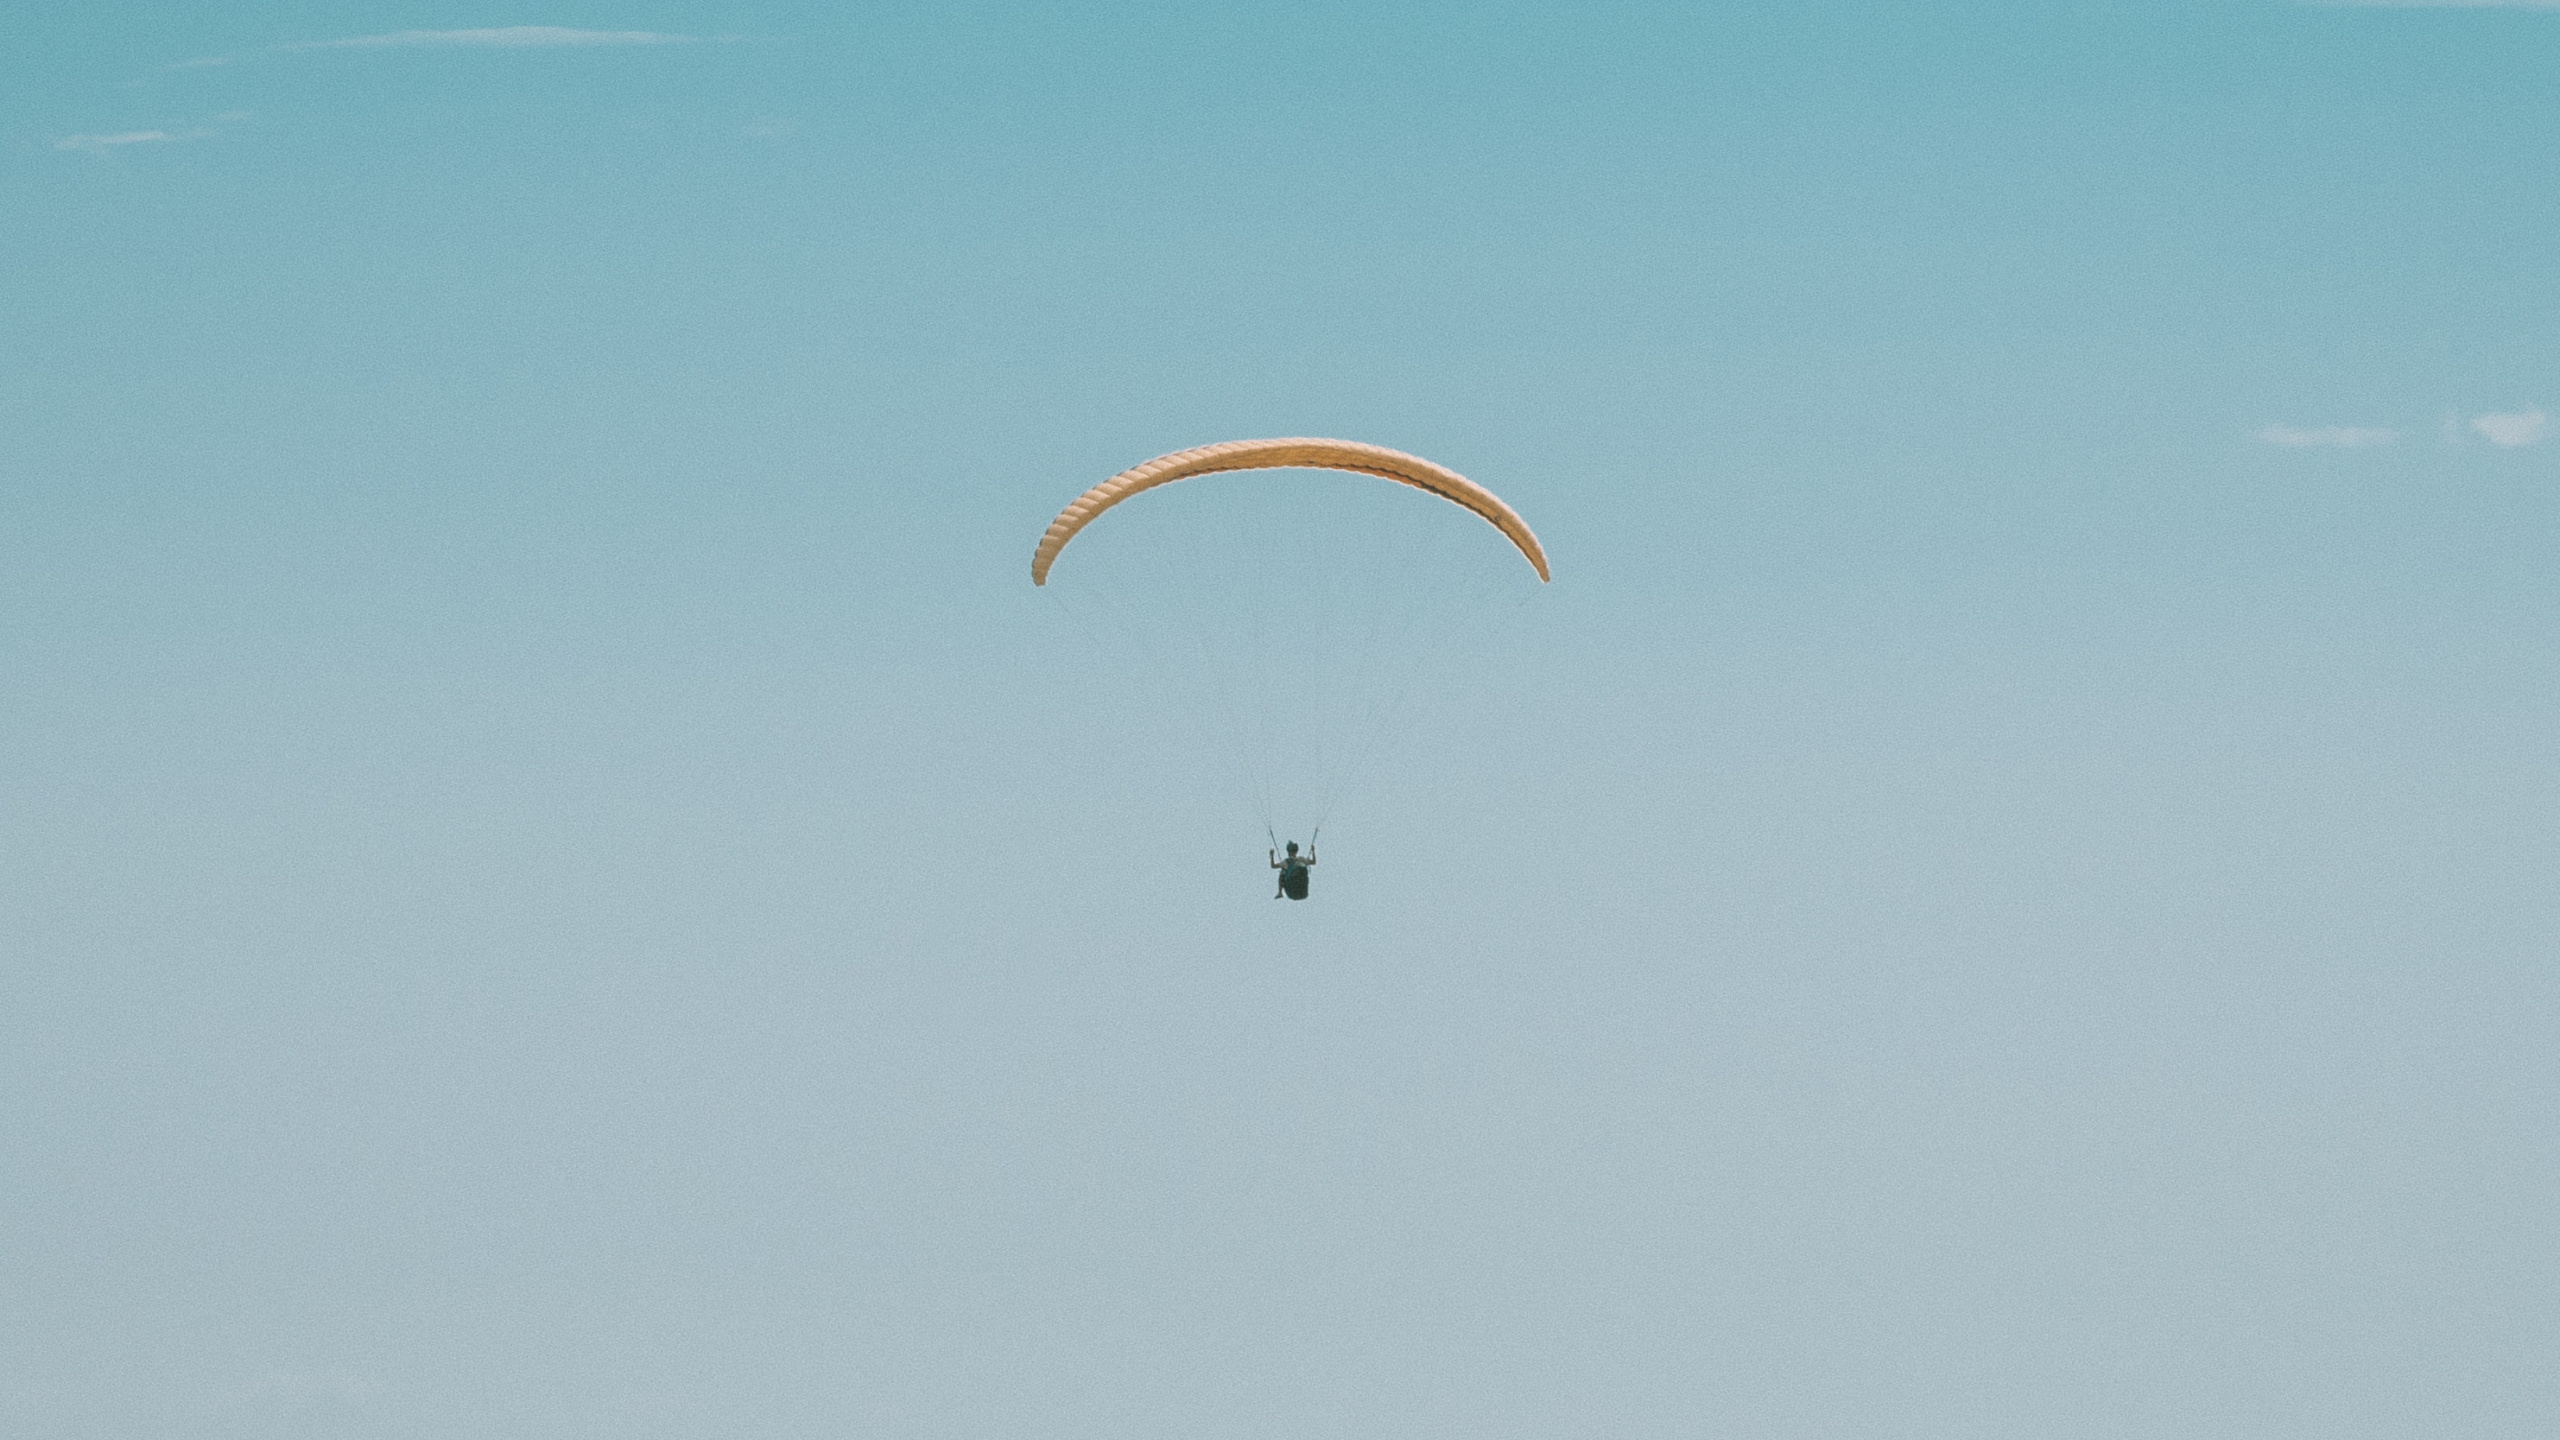 Person in Parachute Under Blue Sky During Daytime. Wallpaper in 2560x1440 Resolution